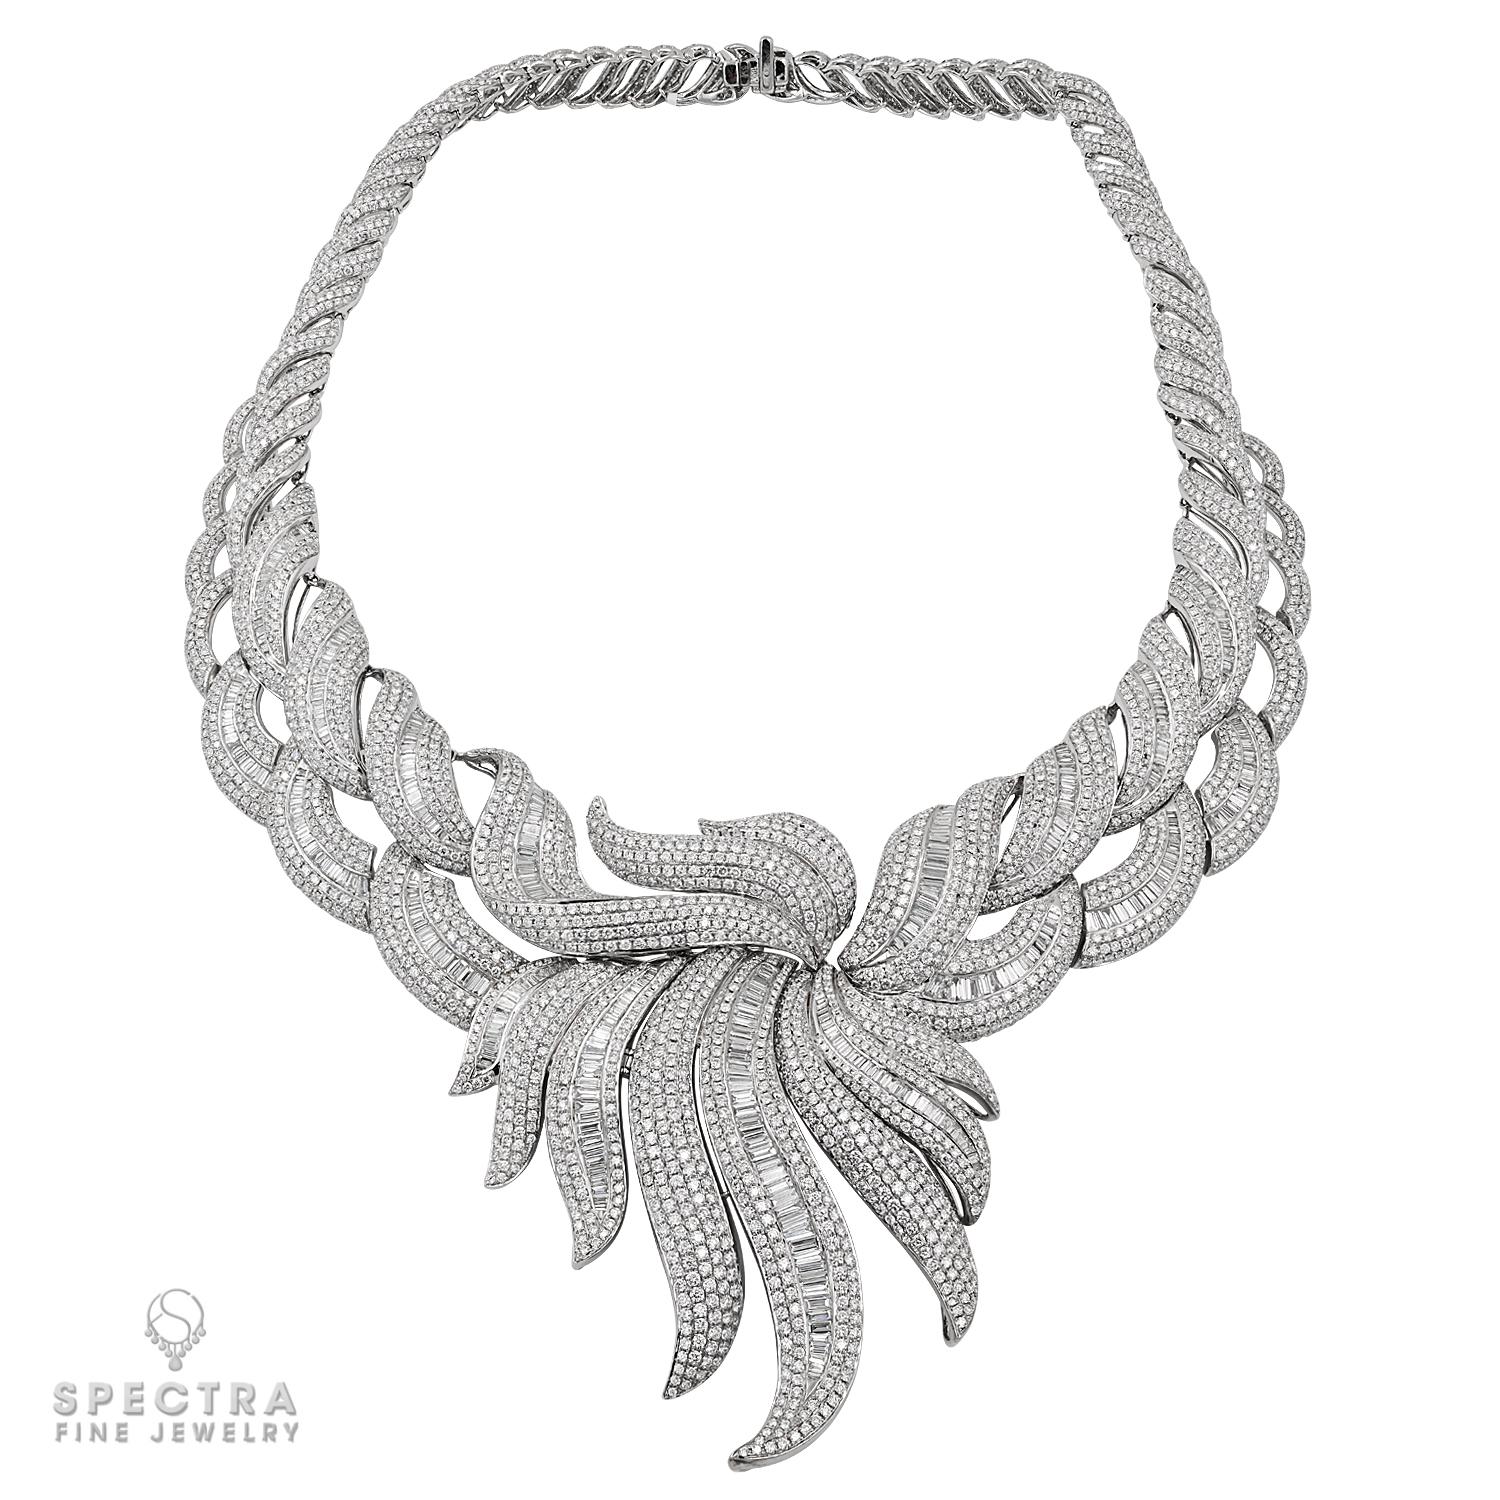 This Spectra Fine Jewelry necklace boasts a stunning combination of 37.82 carats of round-cut and 11.04 carats of baguette-cut diamonds, set in a luxurious blend of platinum and 18kt white gold. The necklace weighs 183.08 grams and features a